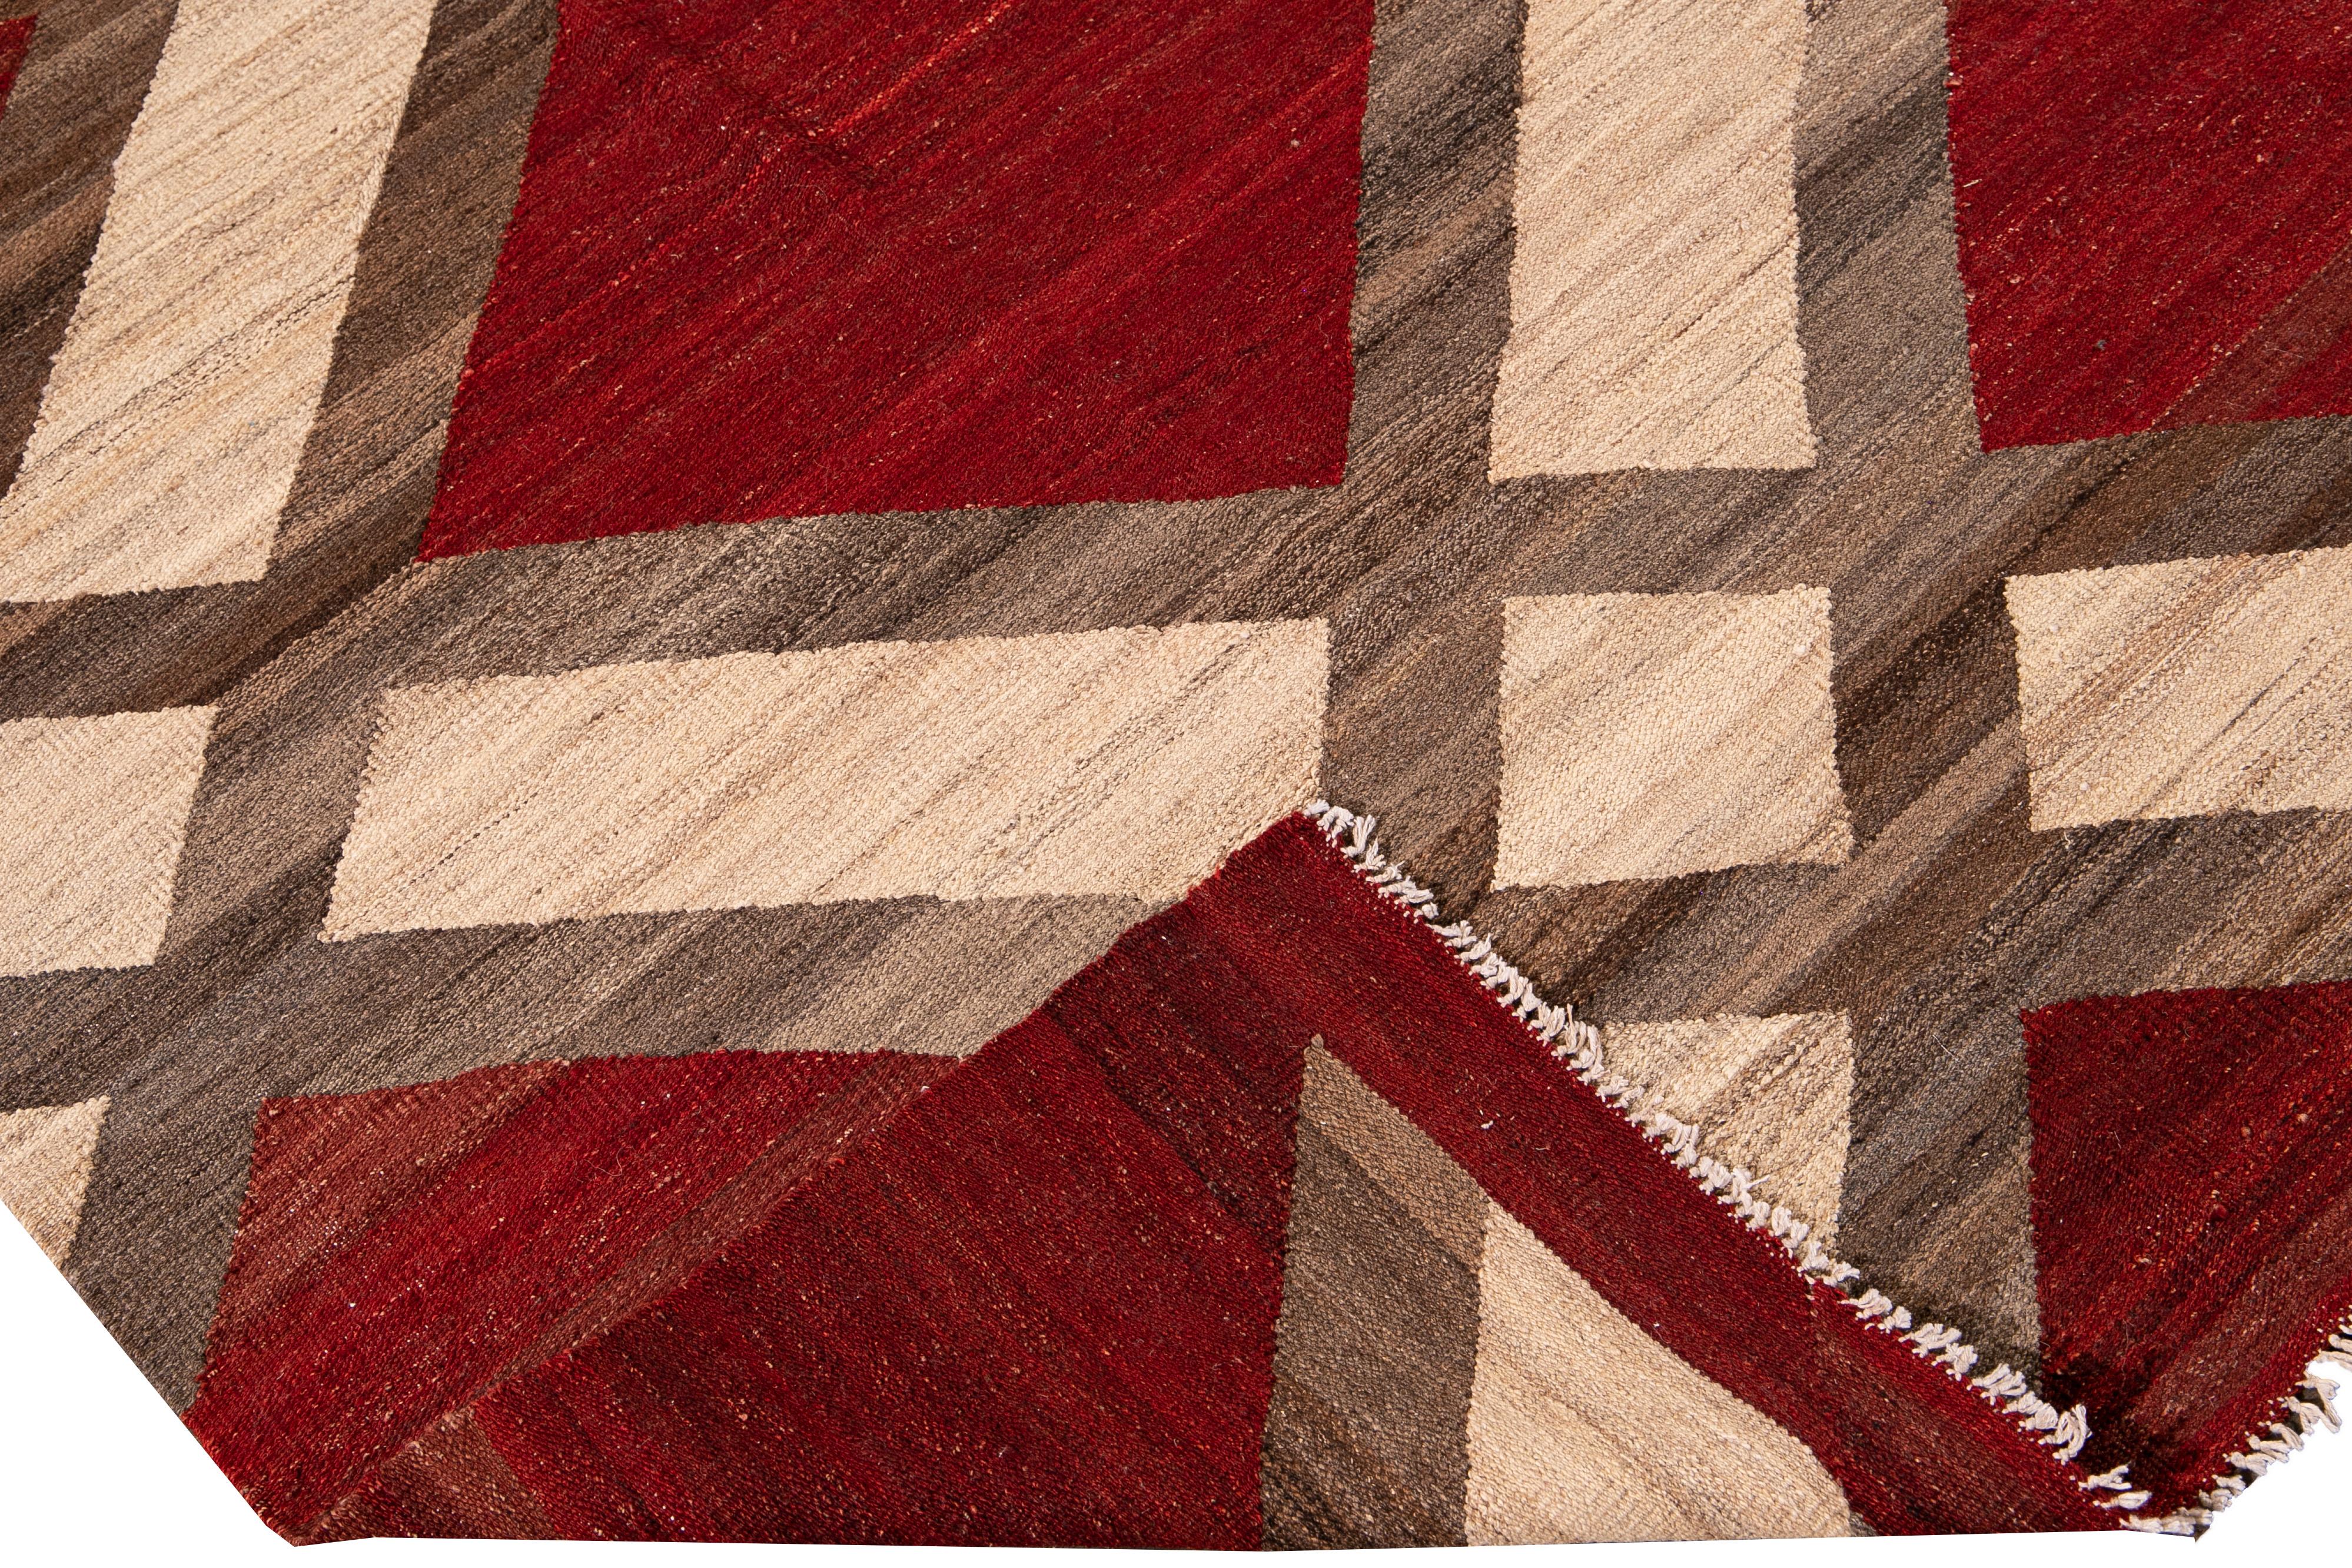 Beautiful modern Kilim flat-weave wool rug with a red field. This piece of art has beige and brown accents in a gorgeous geometric pattern design.

This rug measures: 8'3